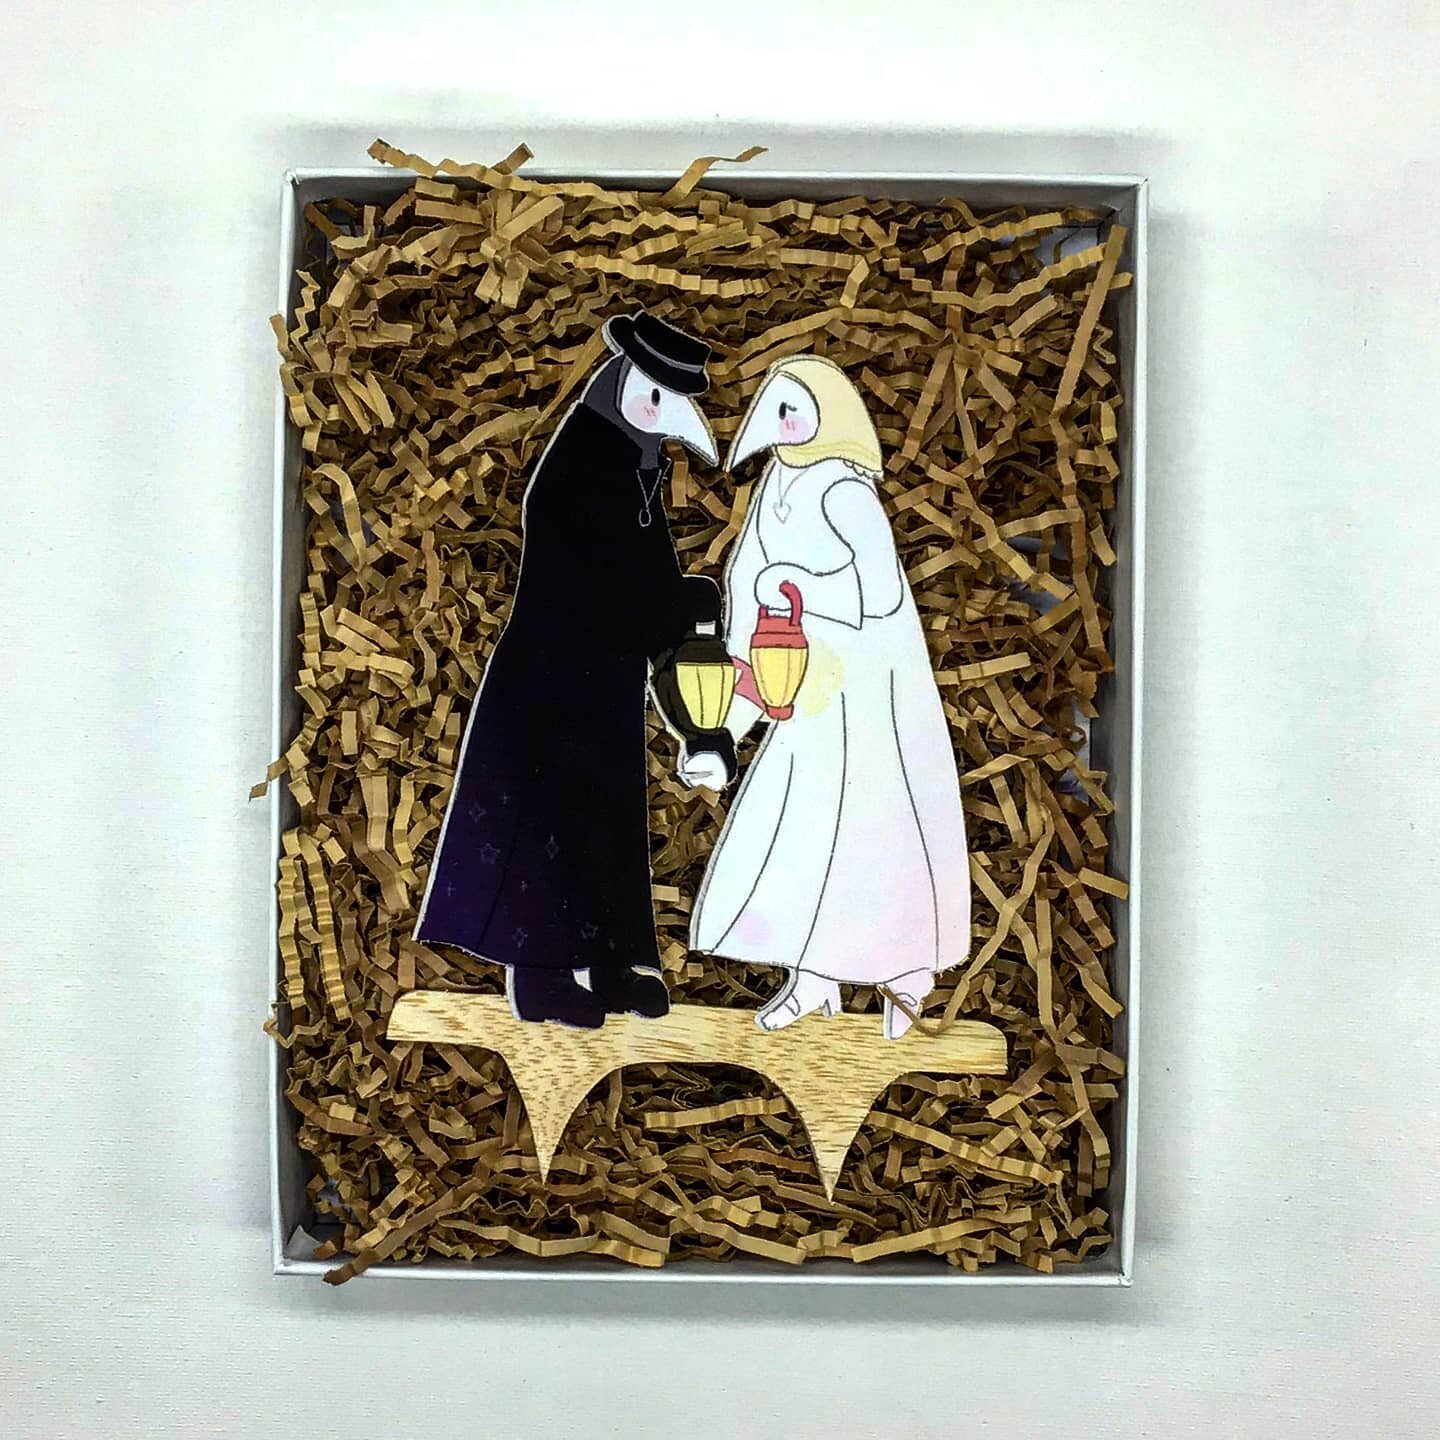 We are back!! Days after reopening my online store, I received this order for an awesome wedding topper. I have a new tool in the shop and am now able to add vinyl stickers to any project! This couple was brought together during the pandemic and is g